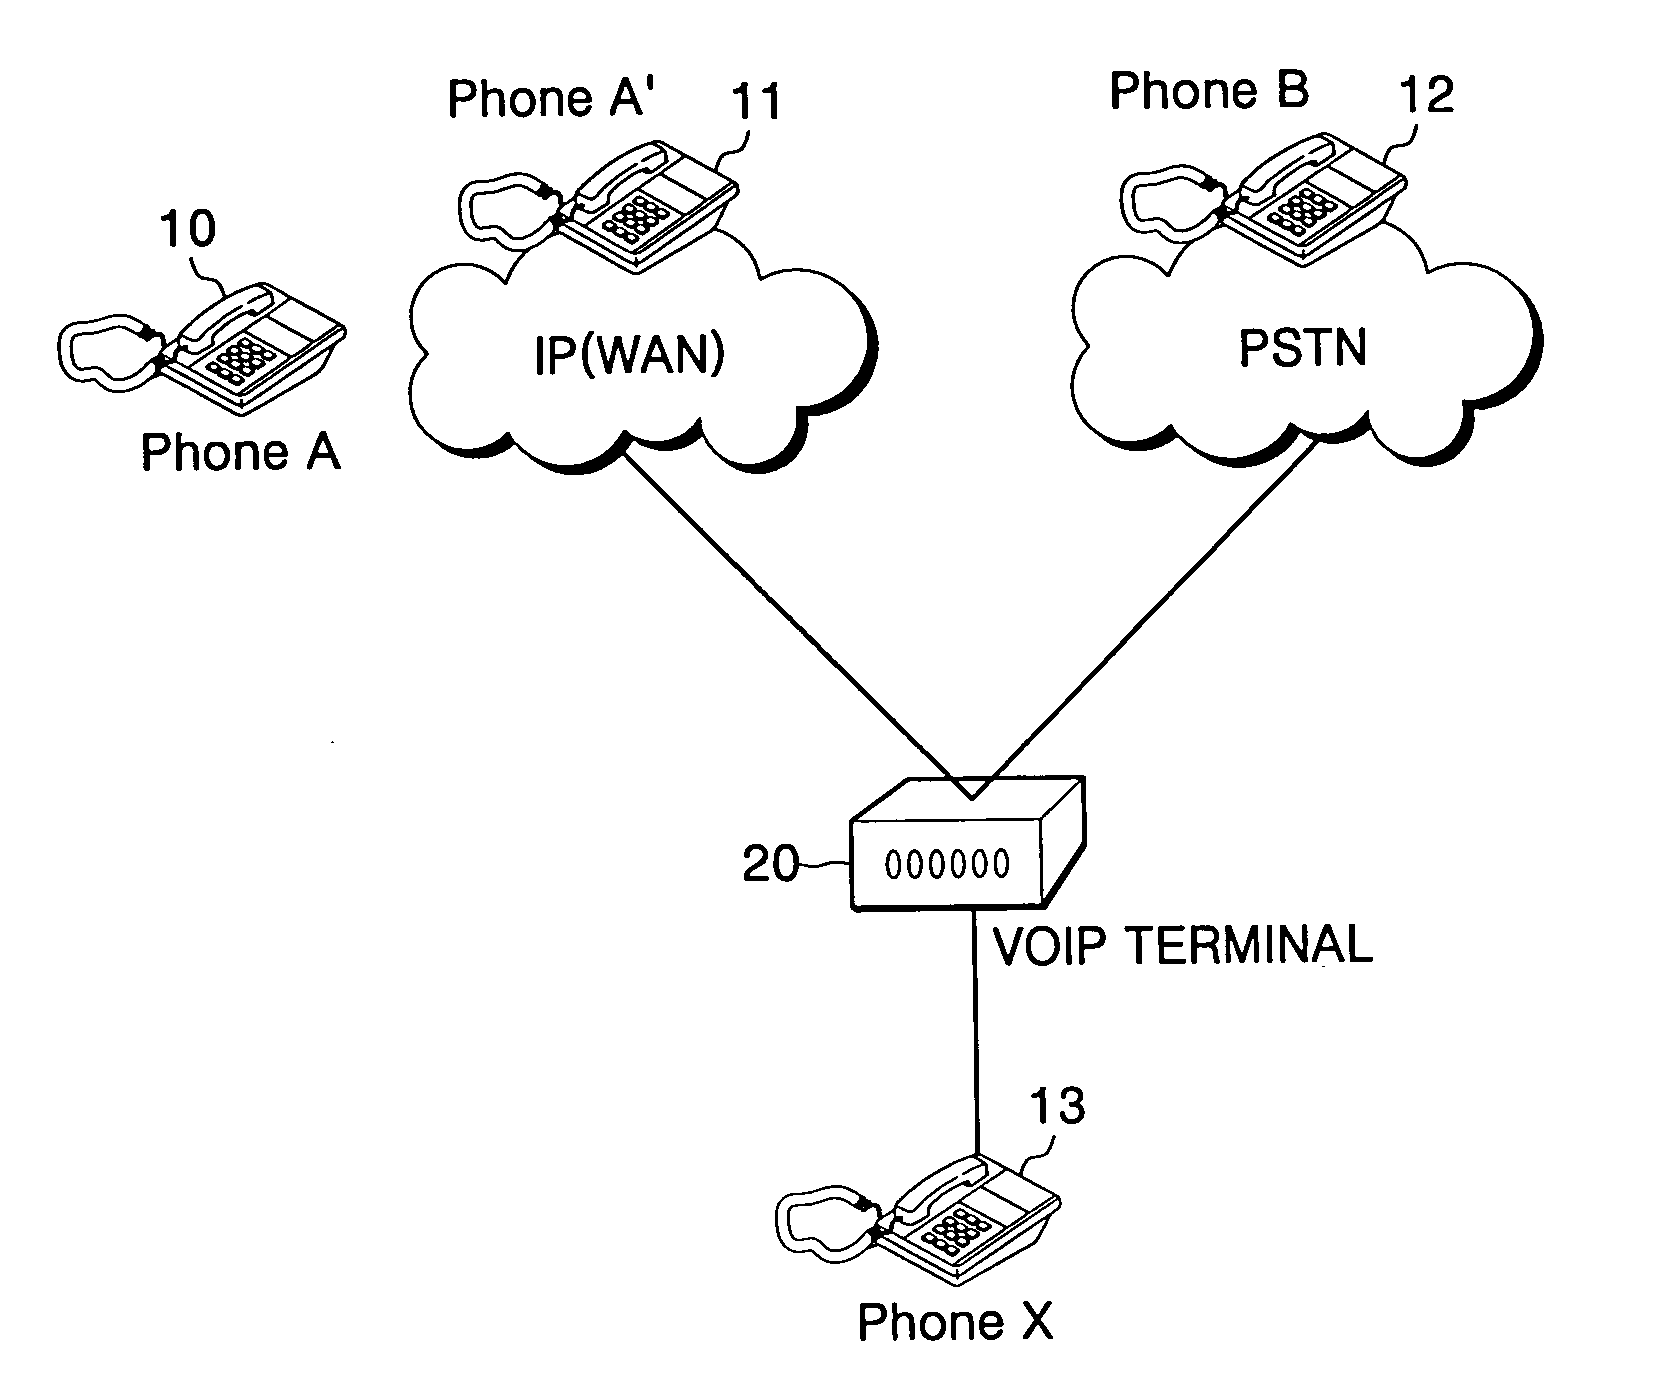 Call waiting service method and apparatus in VoIP terminal with PSTN backup function